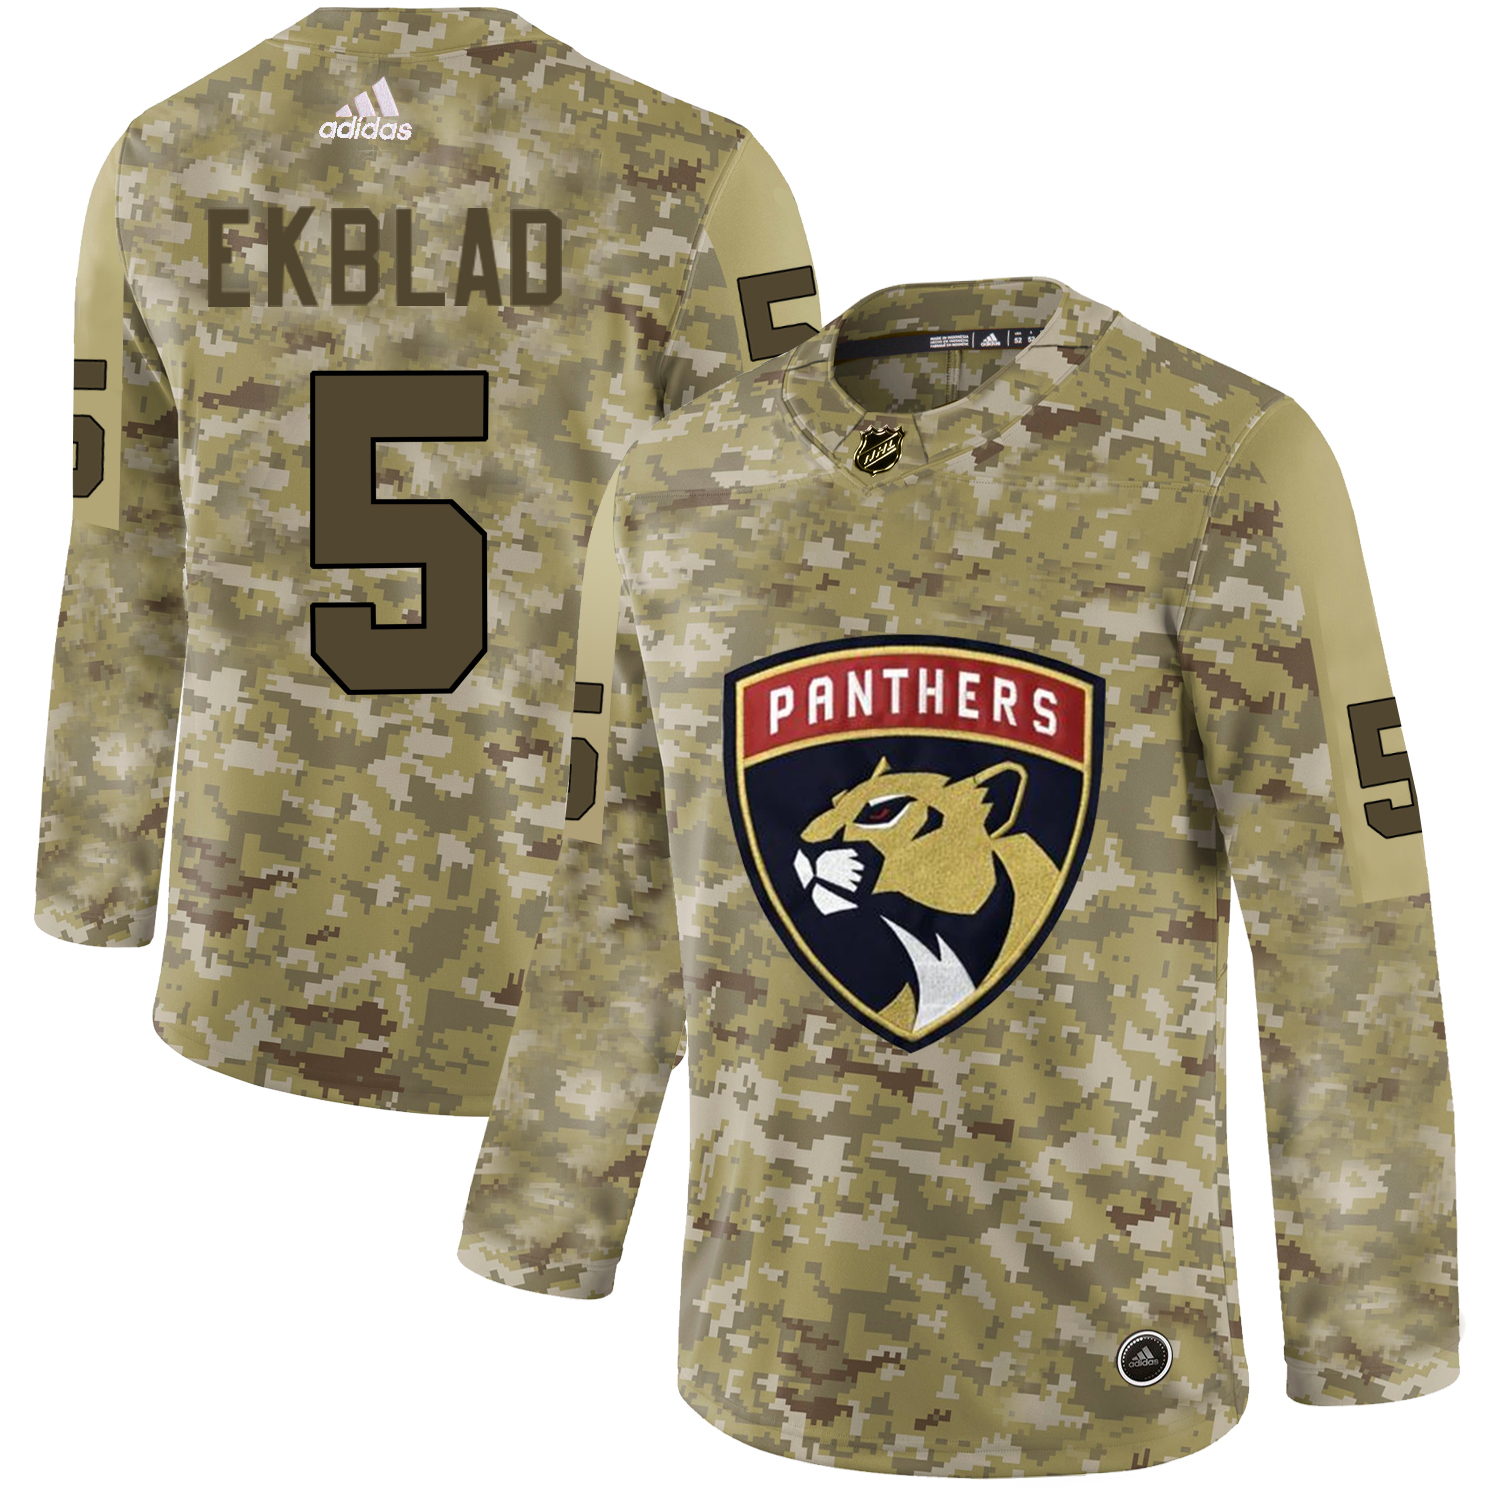 Adidas Panthers #5 Aaron Ekblad Camo Authentic Stitched NHL Jersey